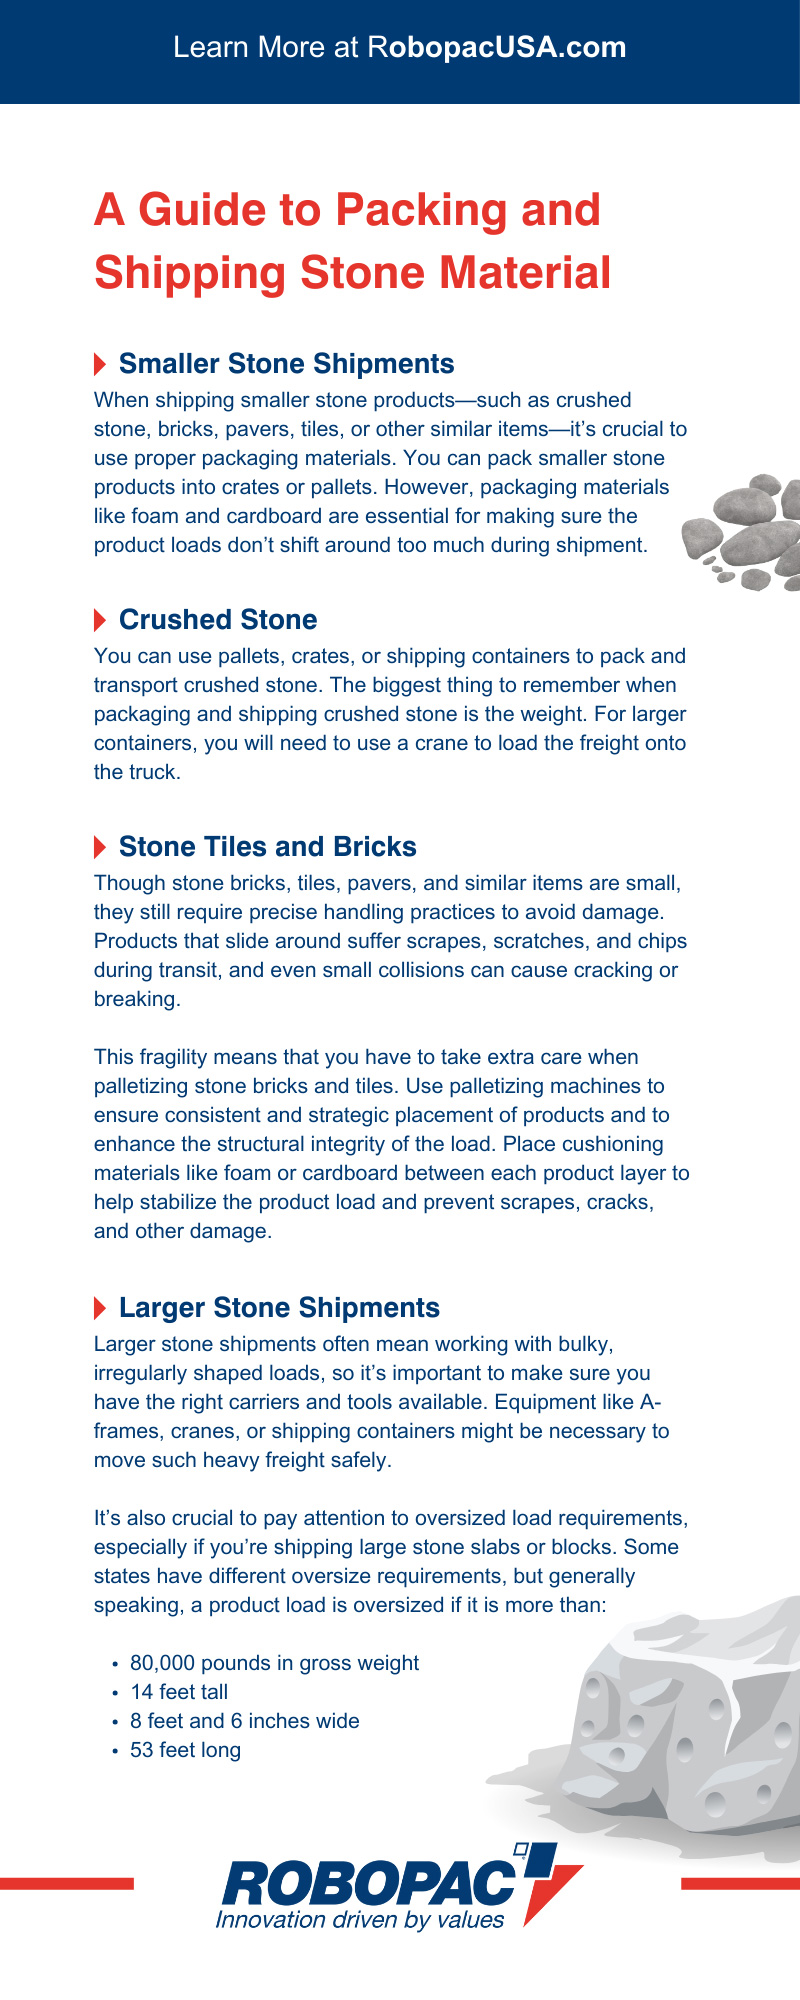 A Guide to Packing and Shipping Stone Material